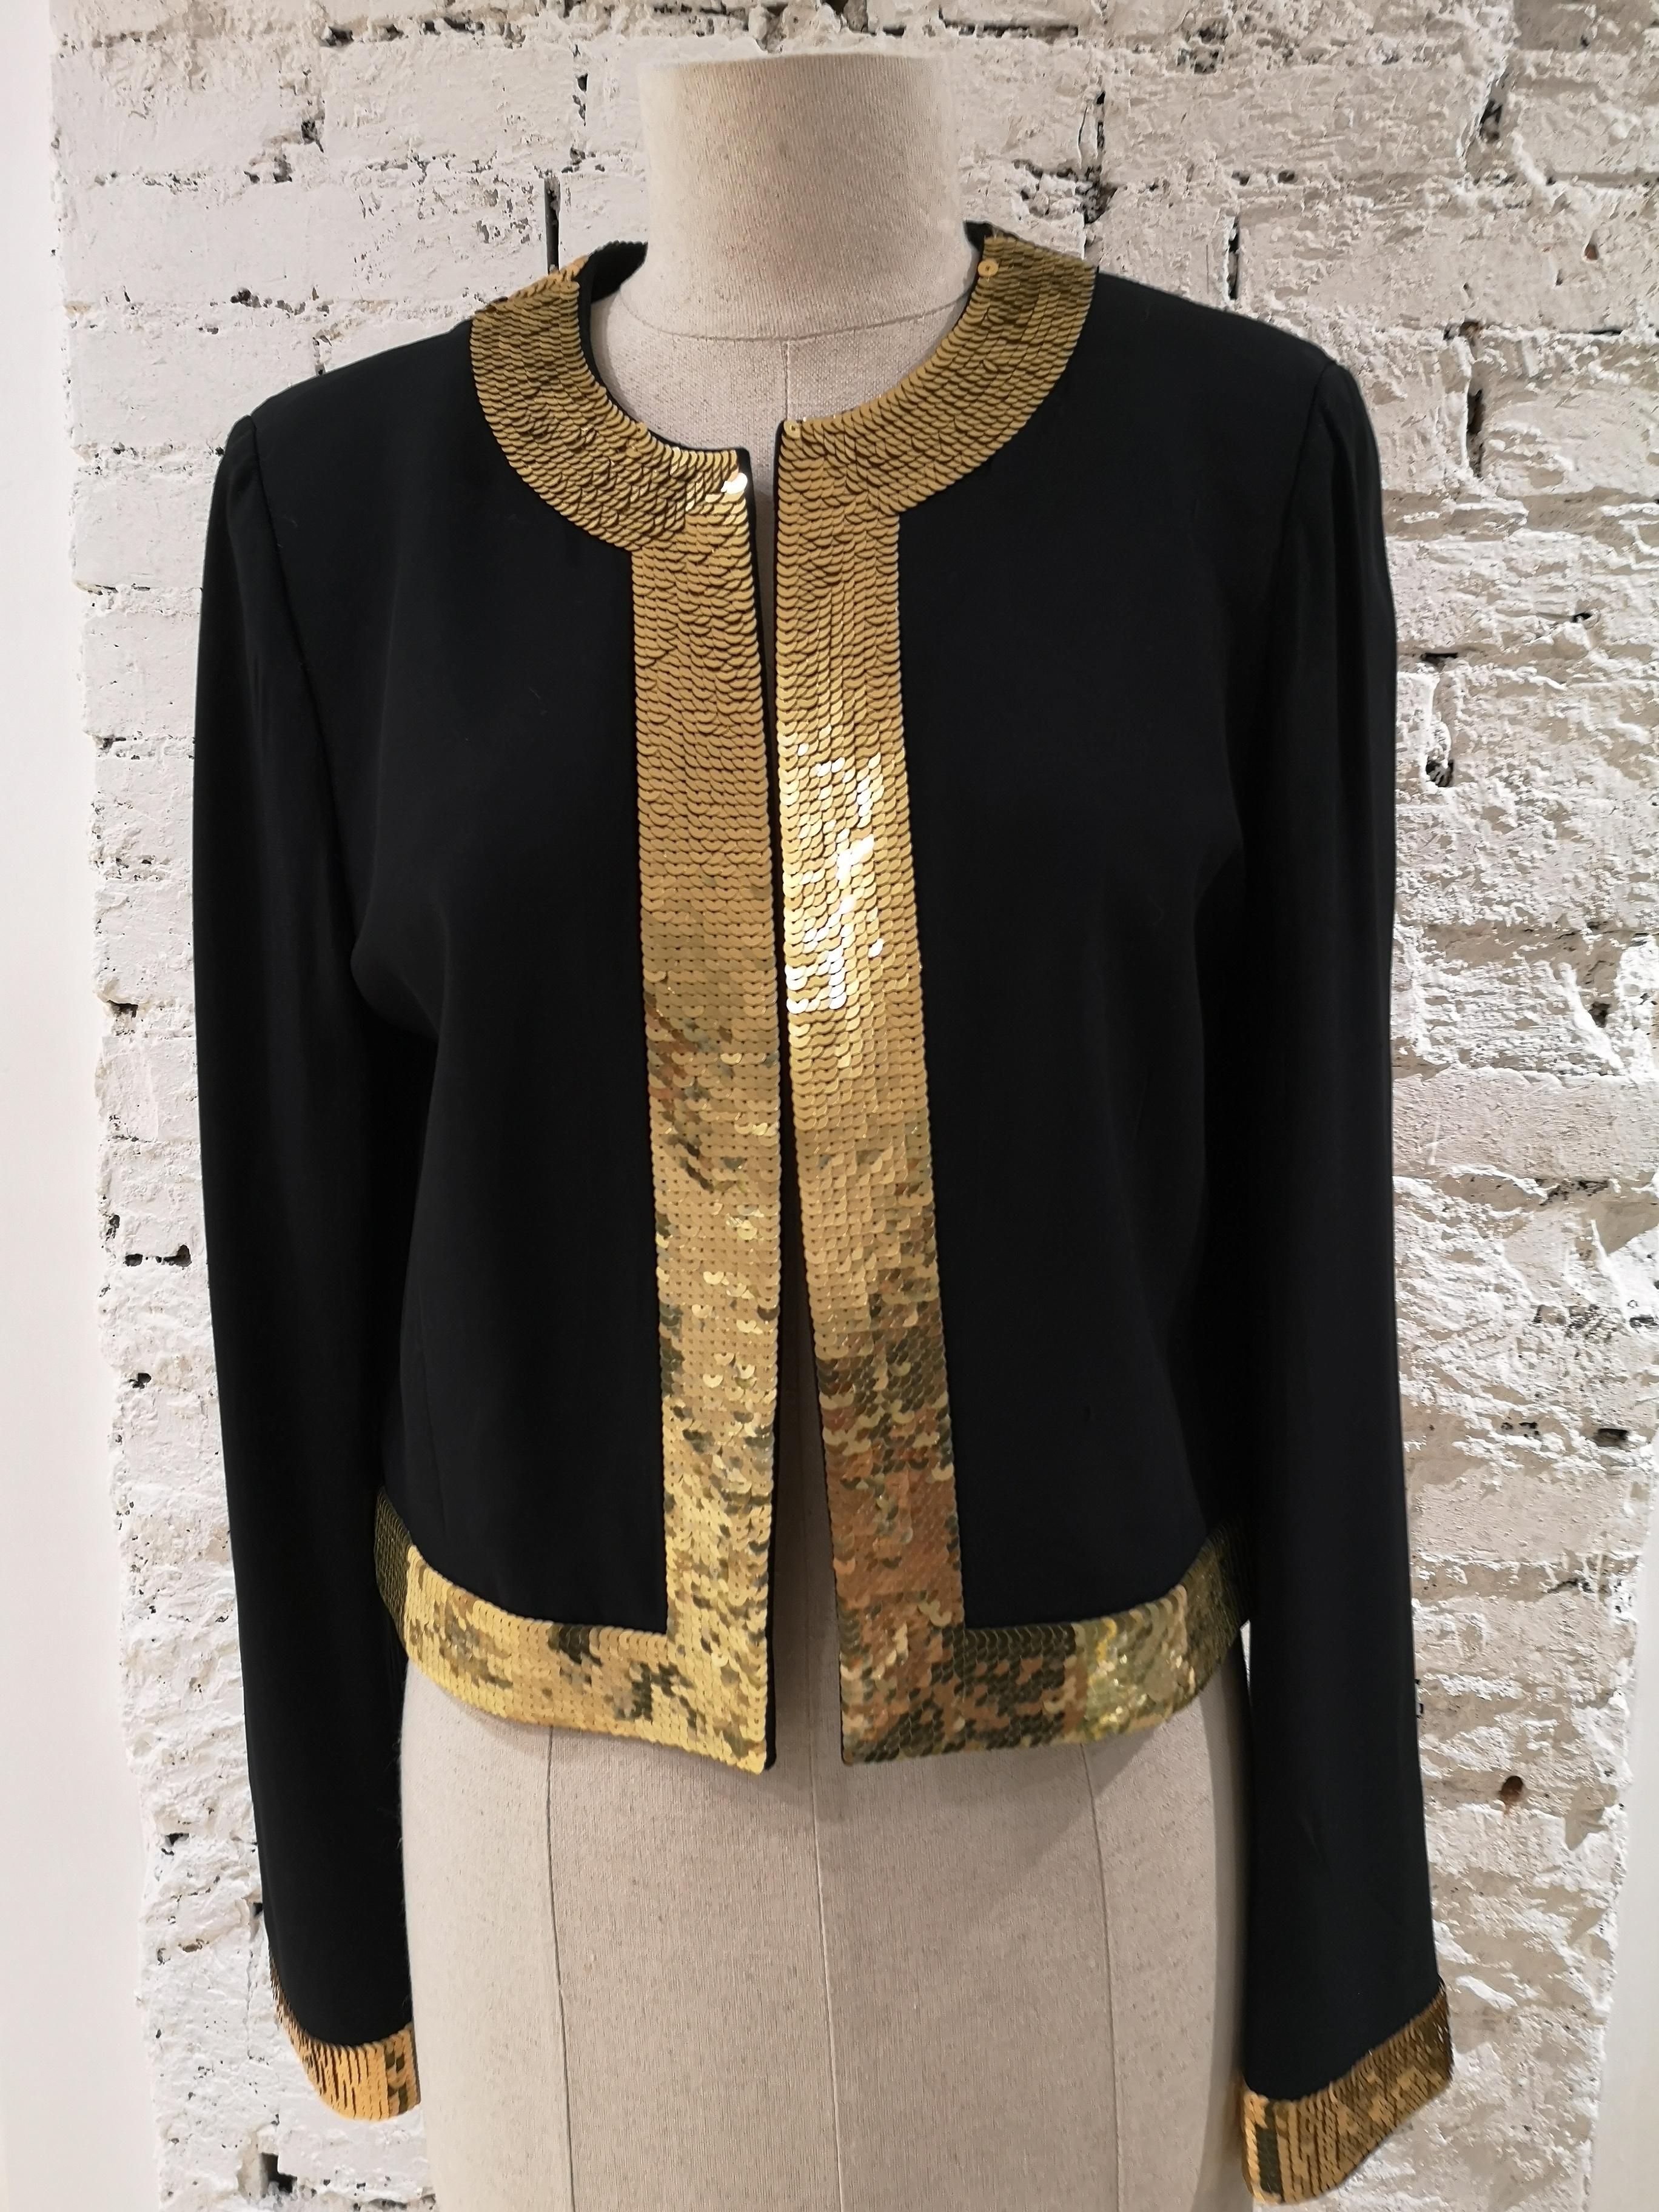 Moschino Wool Black Jacket Gold Sequins 10